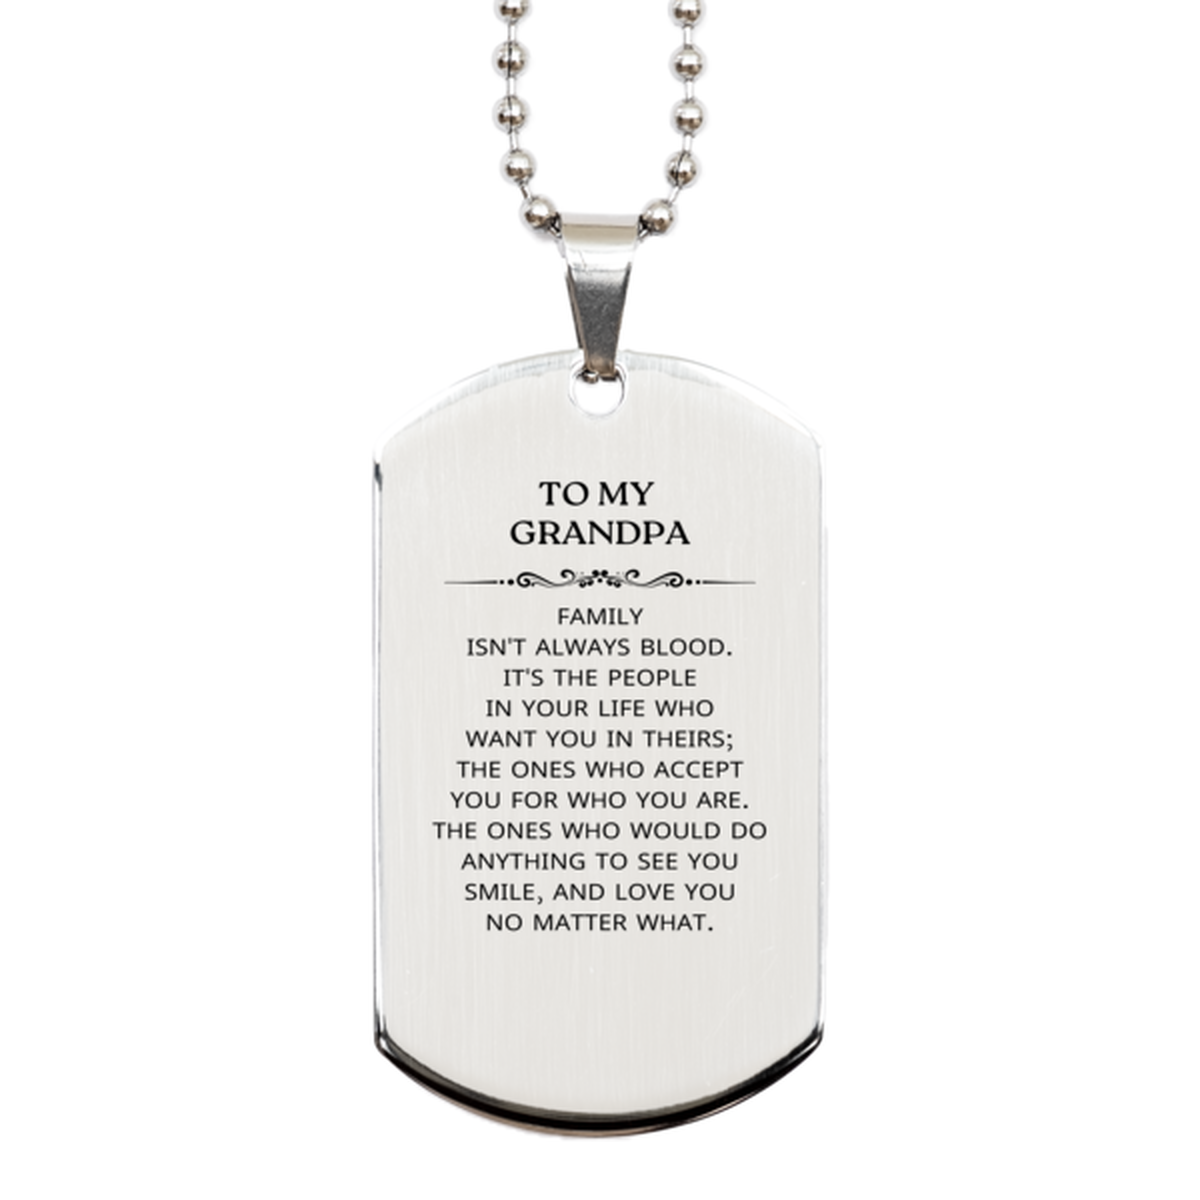 To My Grandpa Gifts, Family isn't always blood, Grandpa Silver Dog Tag, Birthday Christmas Unique Present For Grandpa